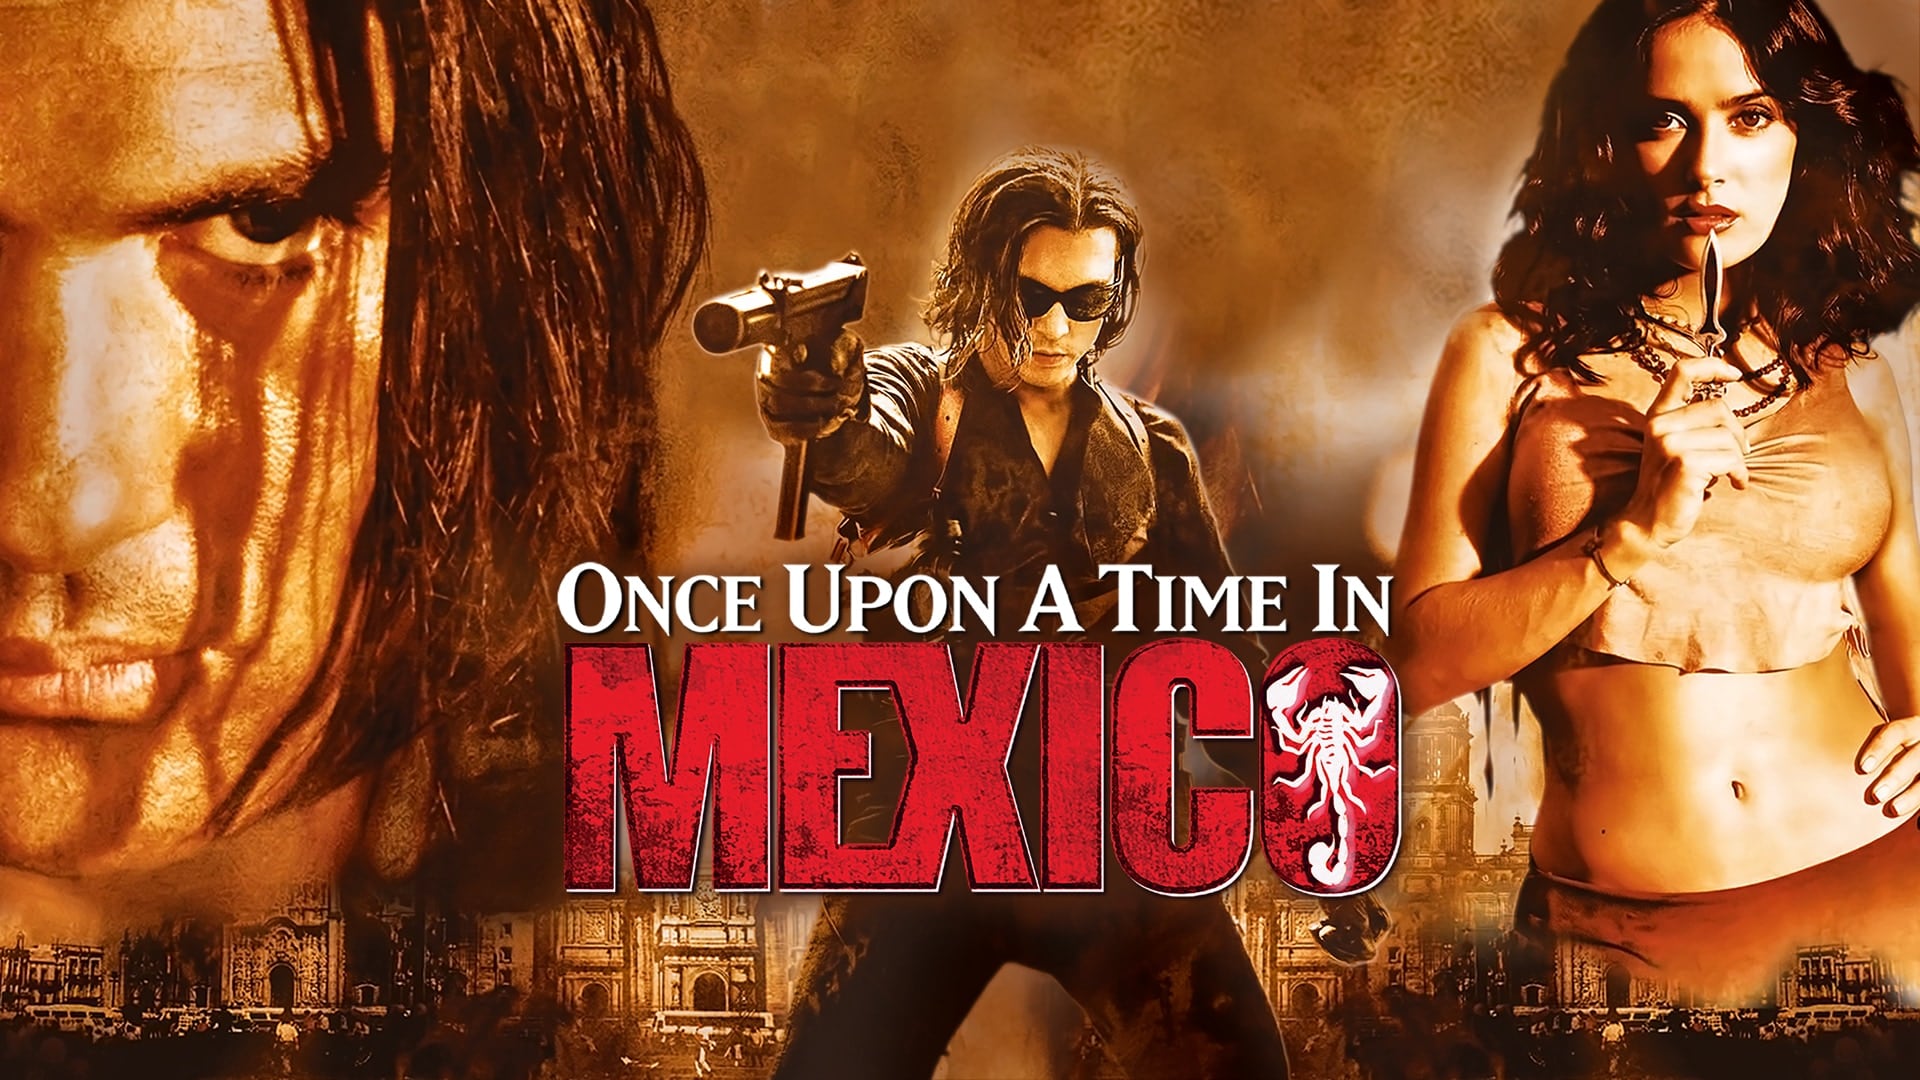 Watch Once Upon a Time in Mexico Online | Stream Full Movies